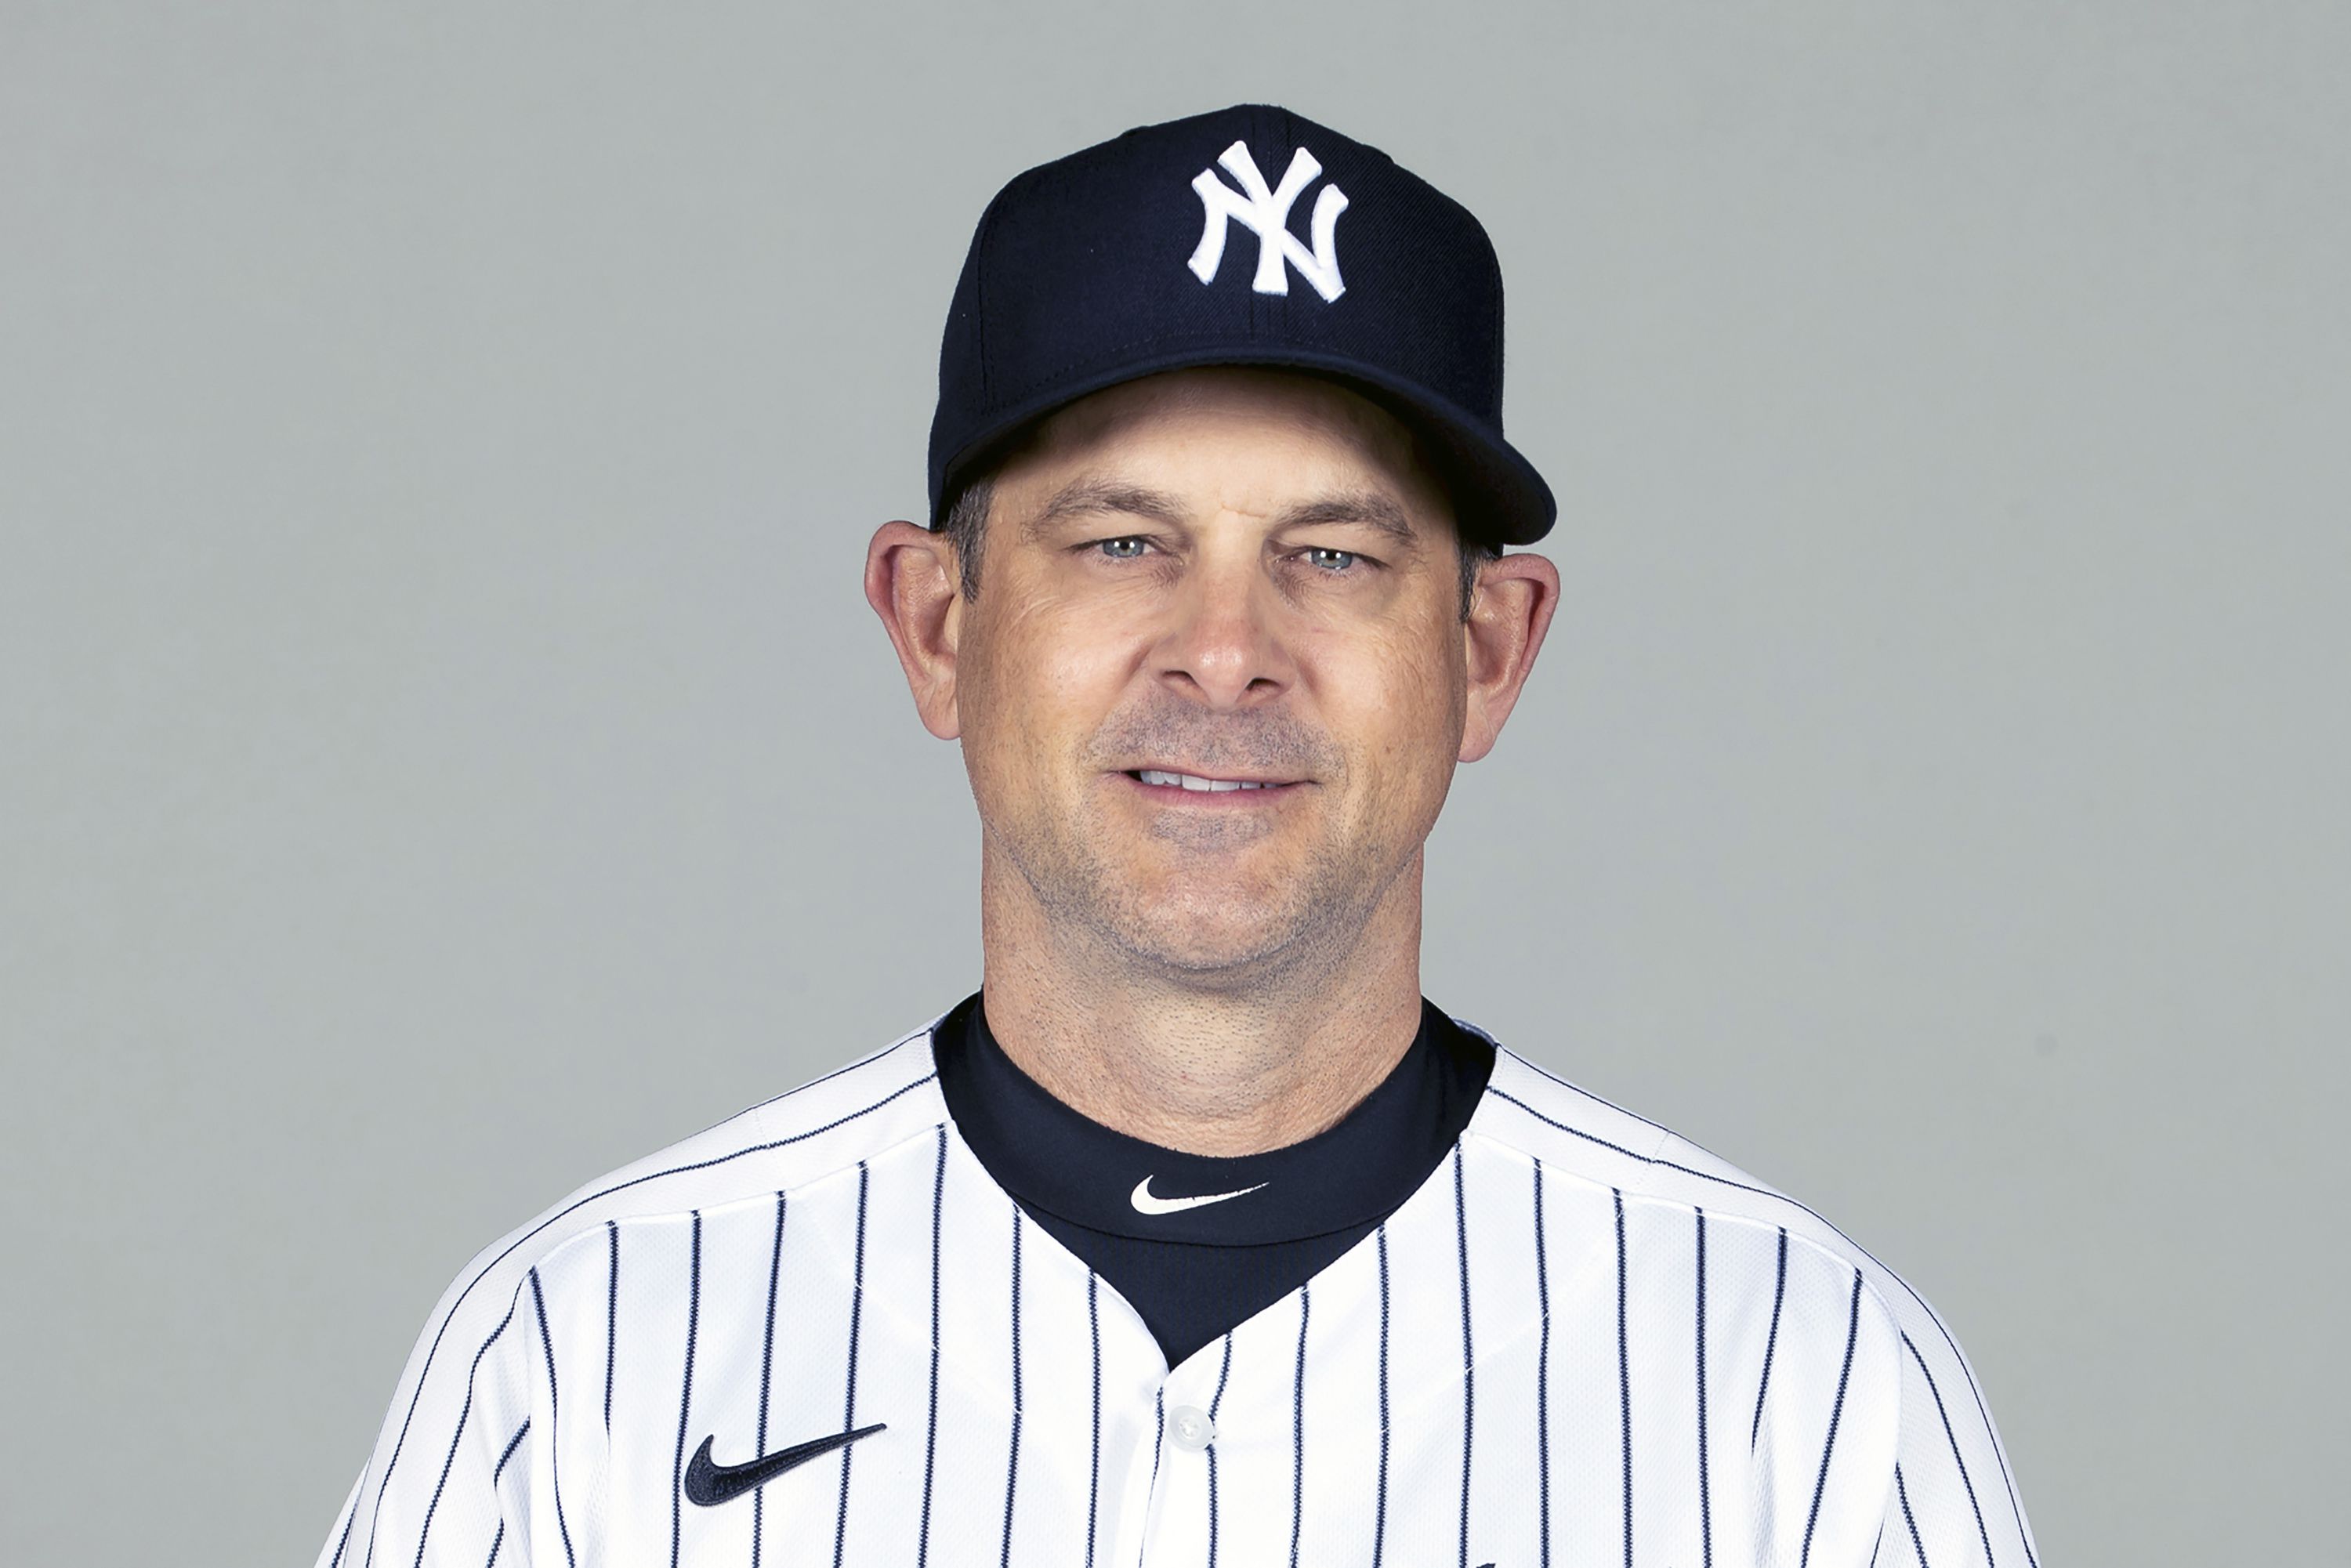 Yankees manager Aaron Boone gets pacemaker, takes leave – The